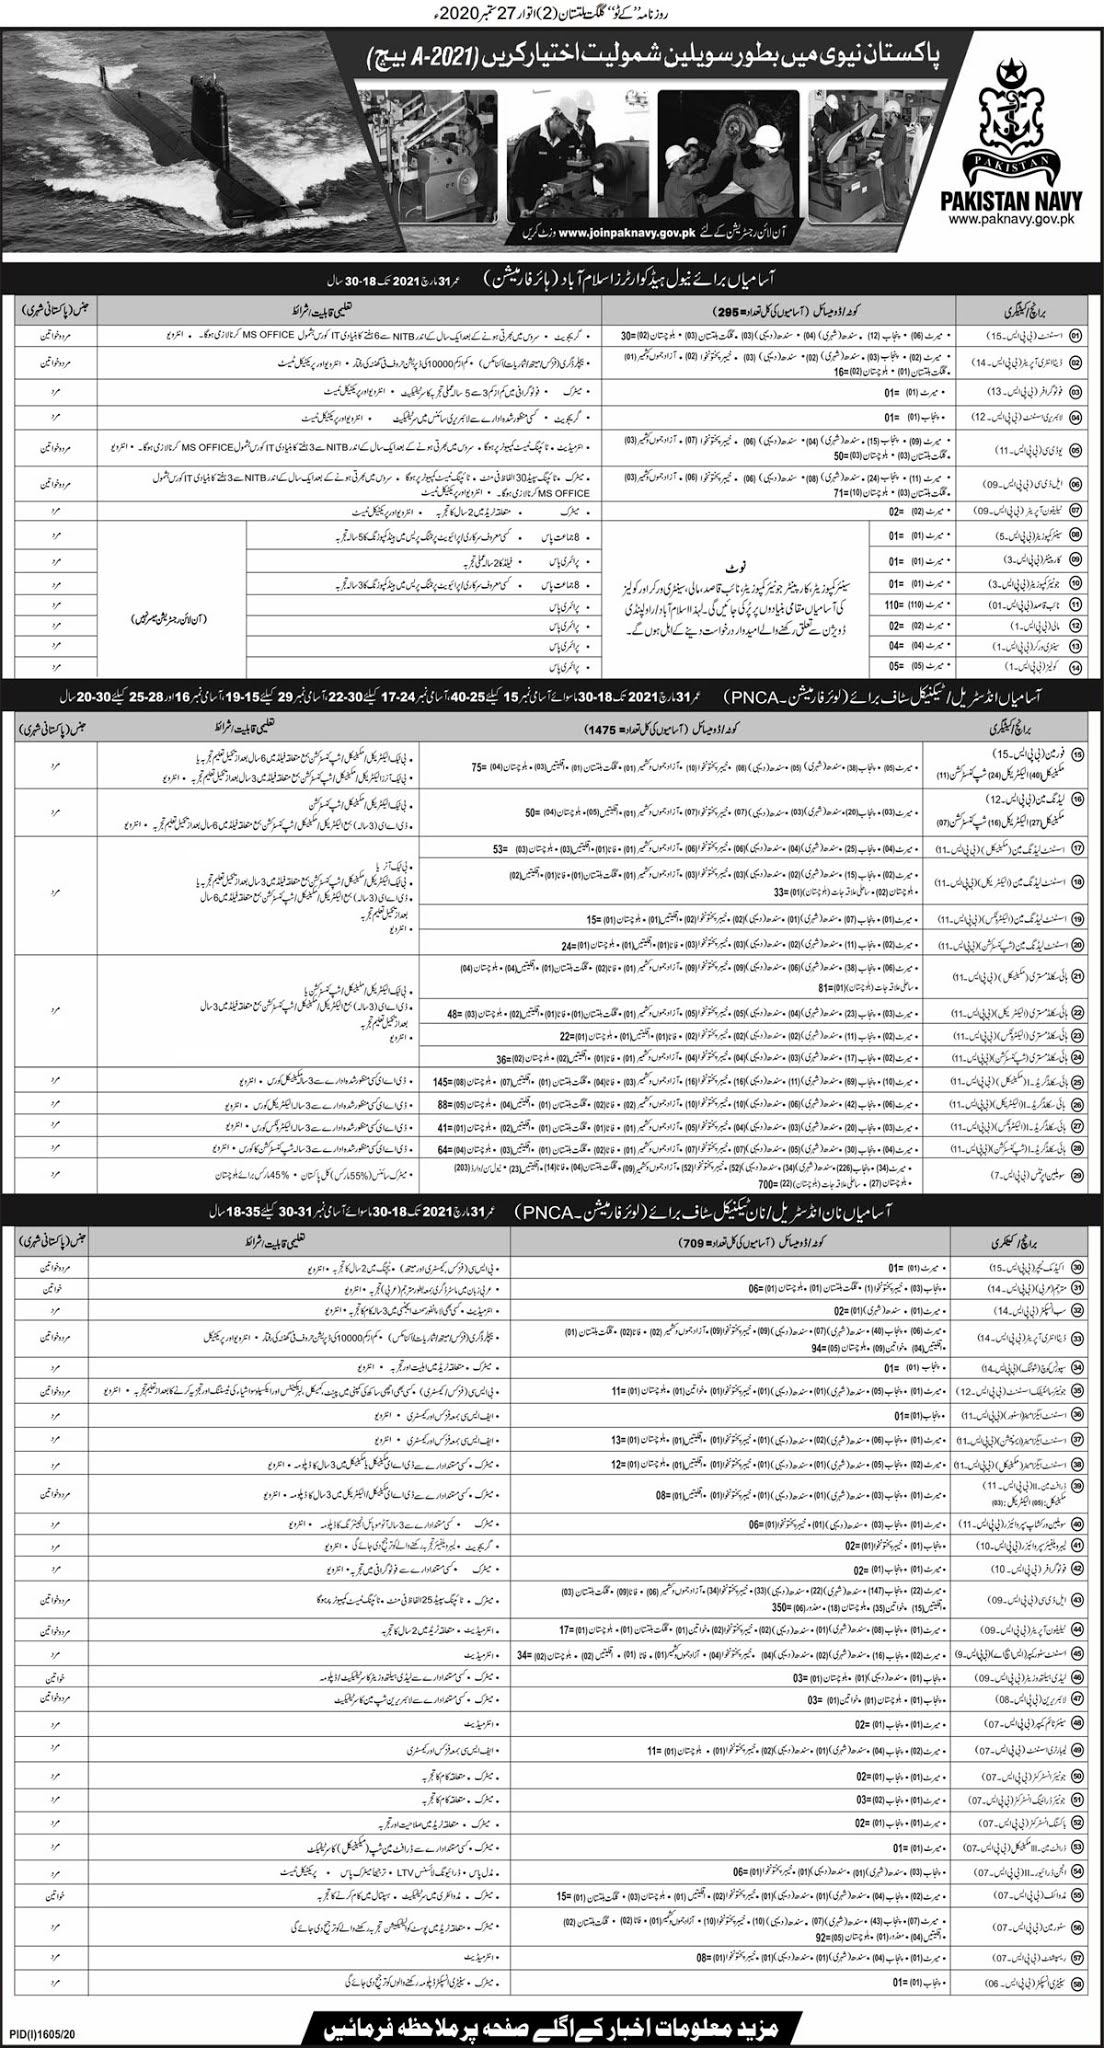 Pakistan Navy 2479 Jobs As a Assistant, Data Entry Operator, UDC, LDC and many more vacant posts 2020